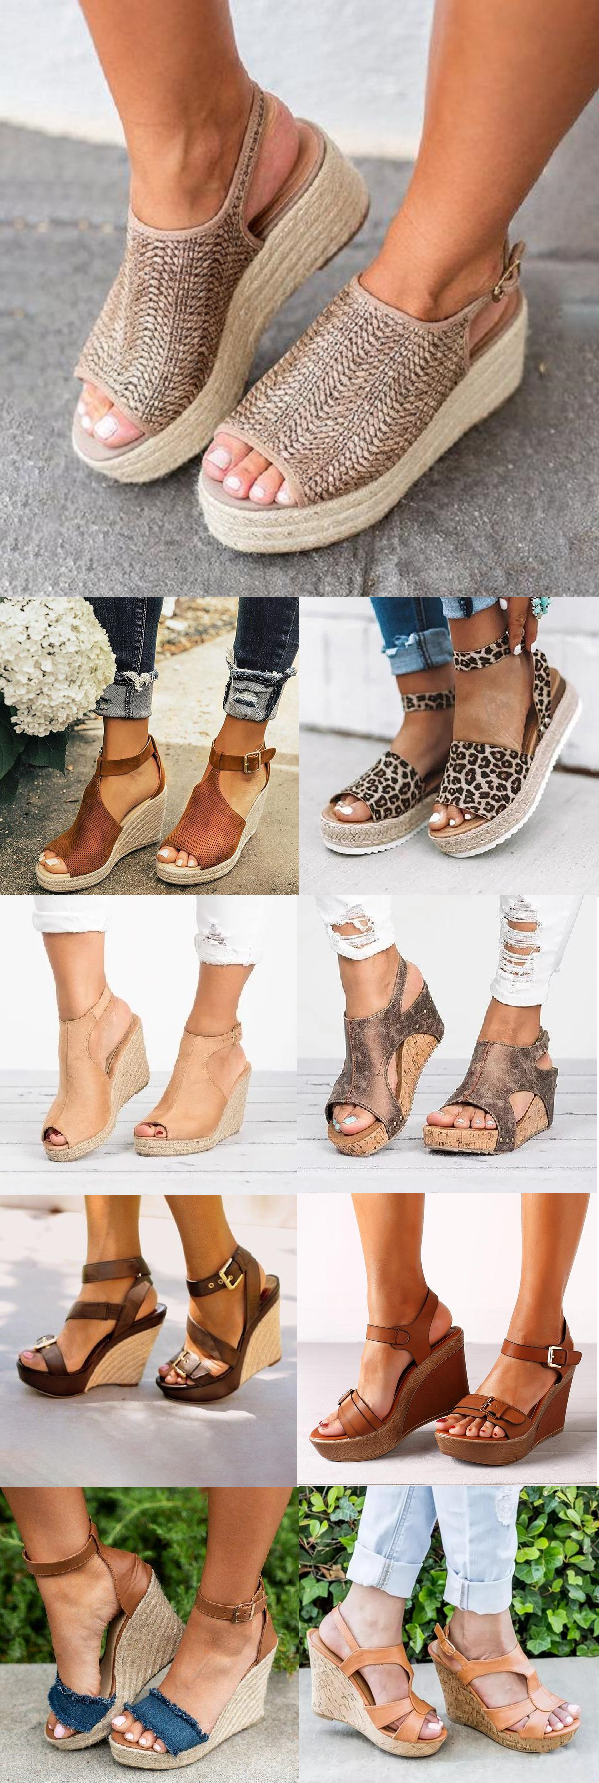 SHOP NOW>>Hot Summer #Wedge Sandals for You.Up to 68% OFF! Buy More Save More!Shop Now! -   17 feminine casual style
 ideas